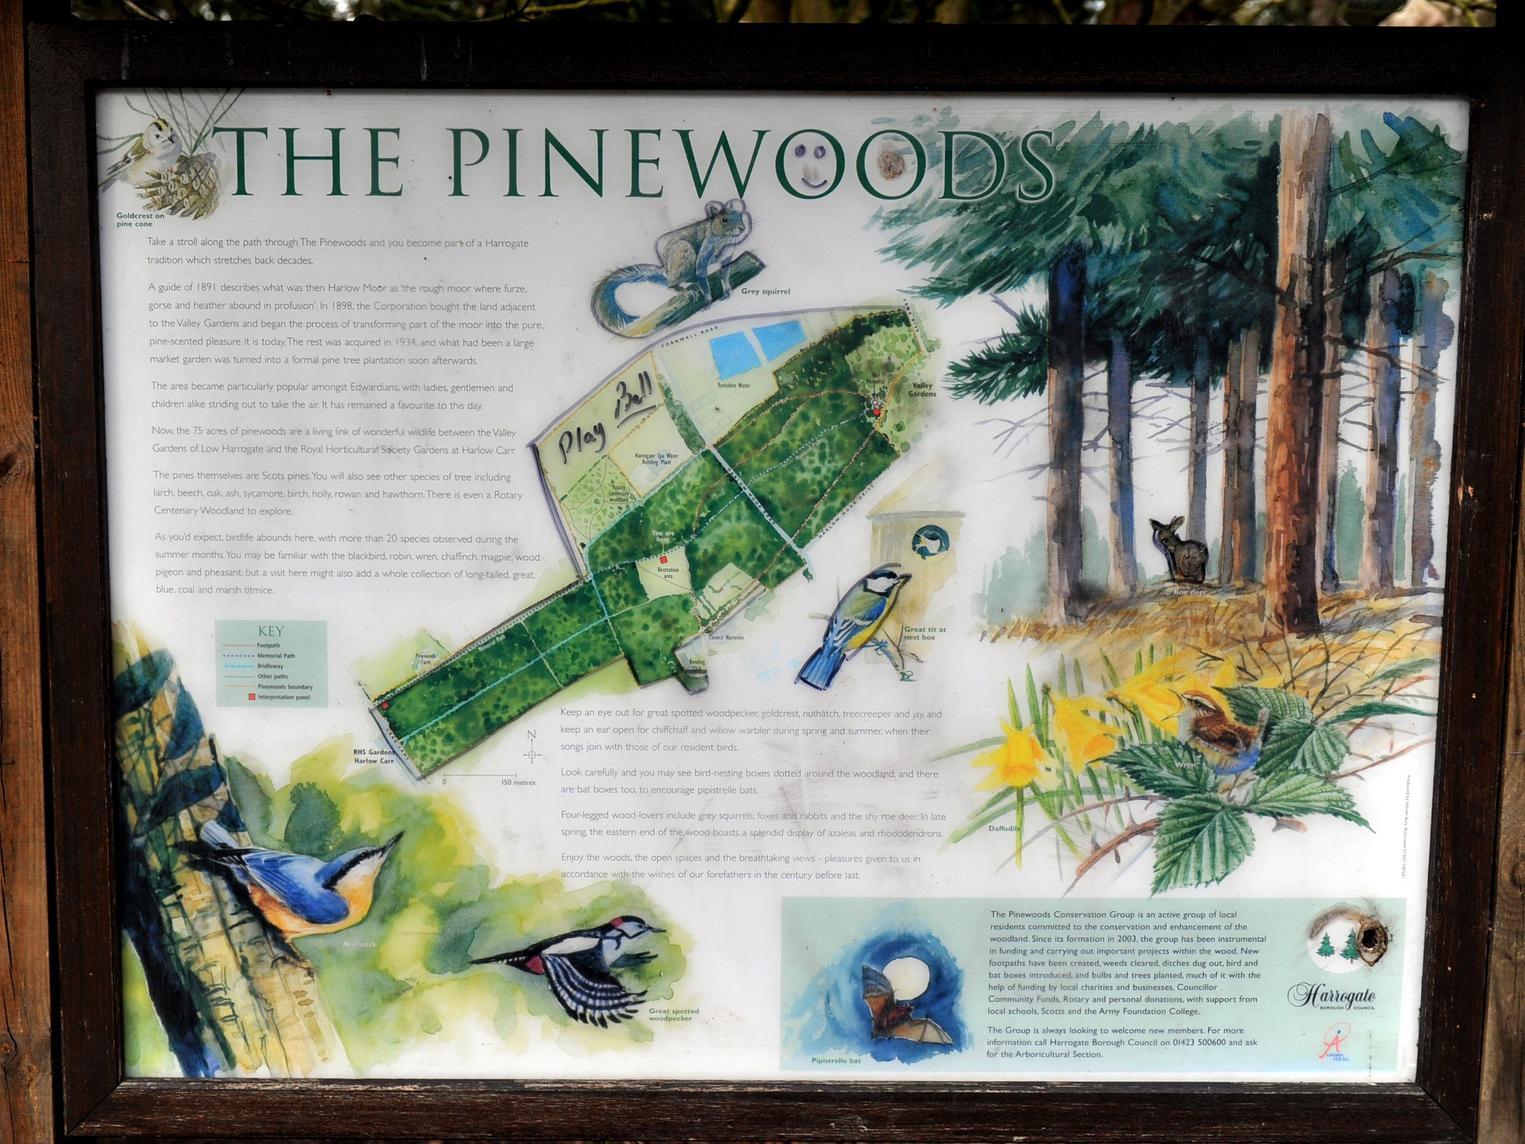 The perfect spot to take in all the wildlife Harrogate has to offer - and for an extra treat, why not walk all the way through The Pinewoods to Harlow Carr?